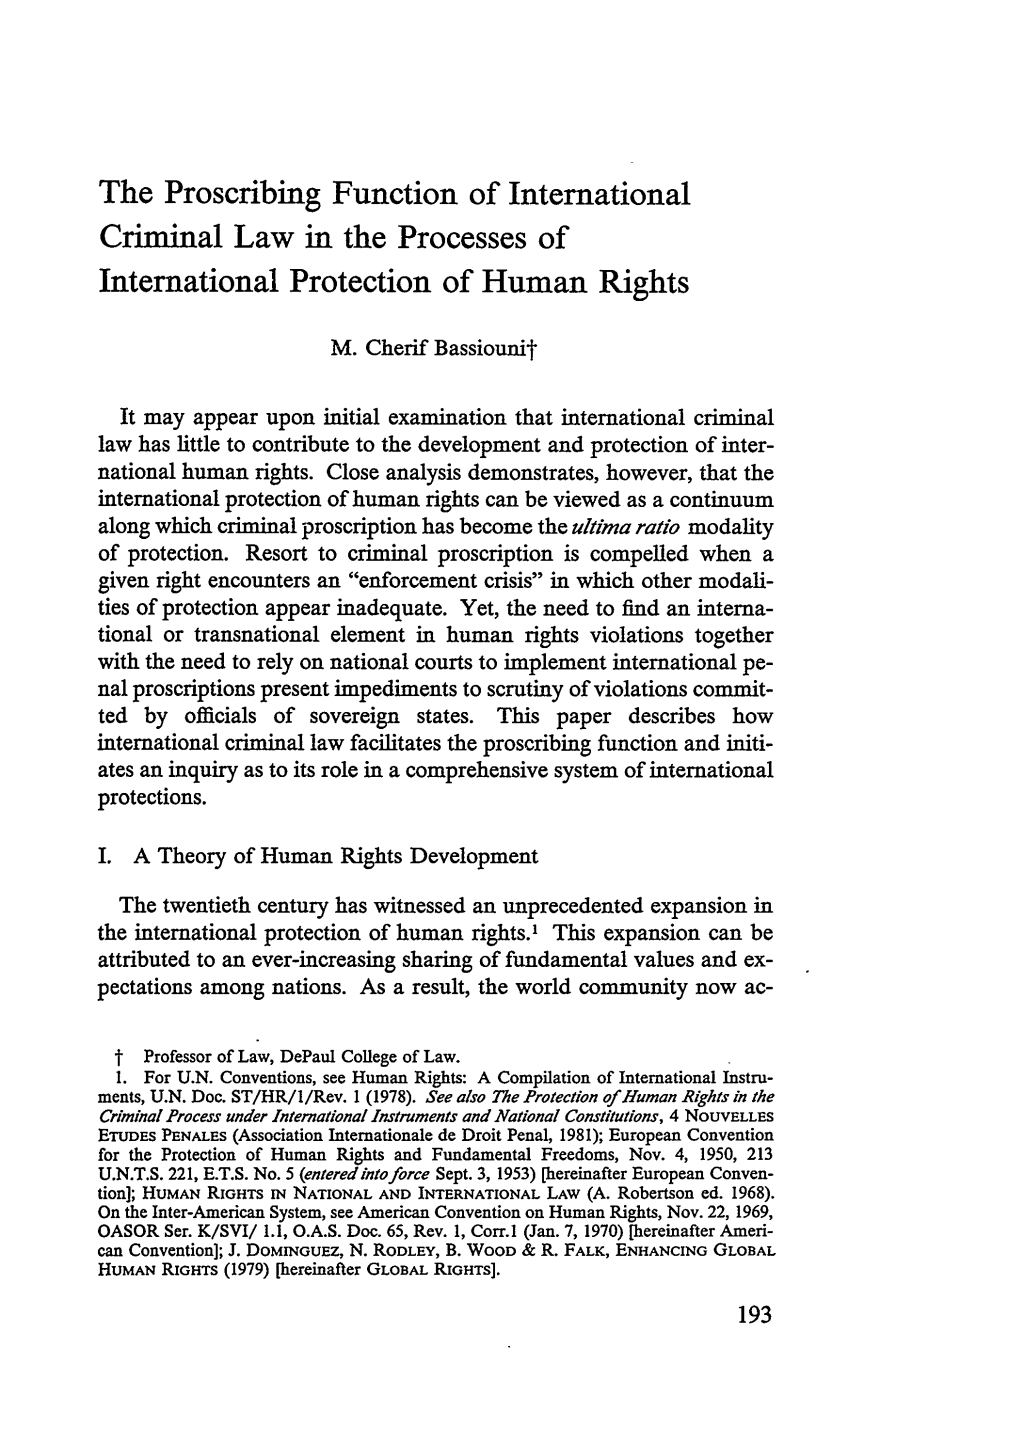 The Proscribing Function of International Criminal Law in the Processes of International Protection of Human Rights